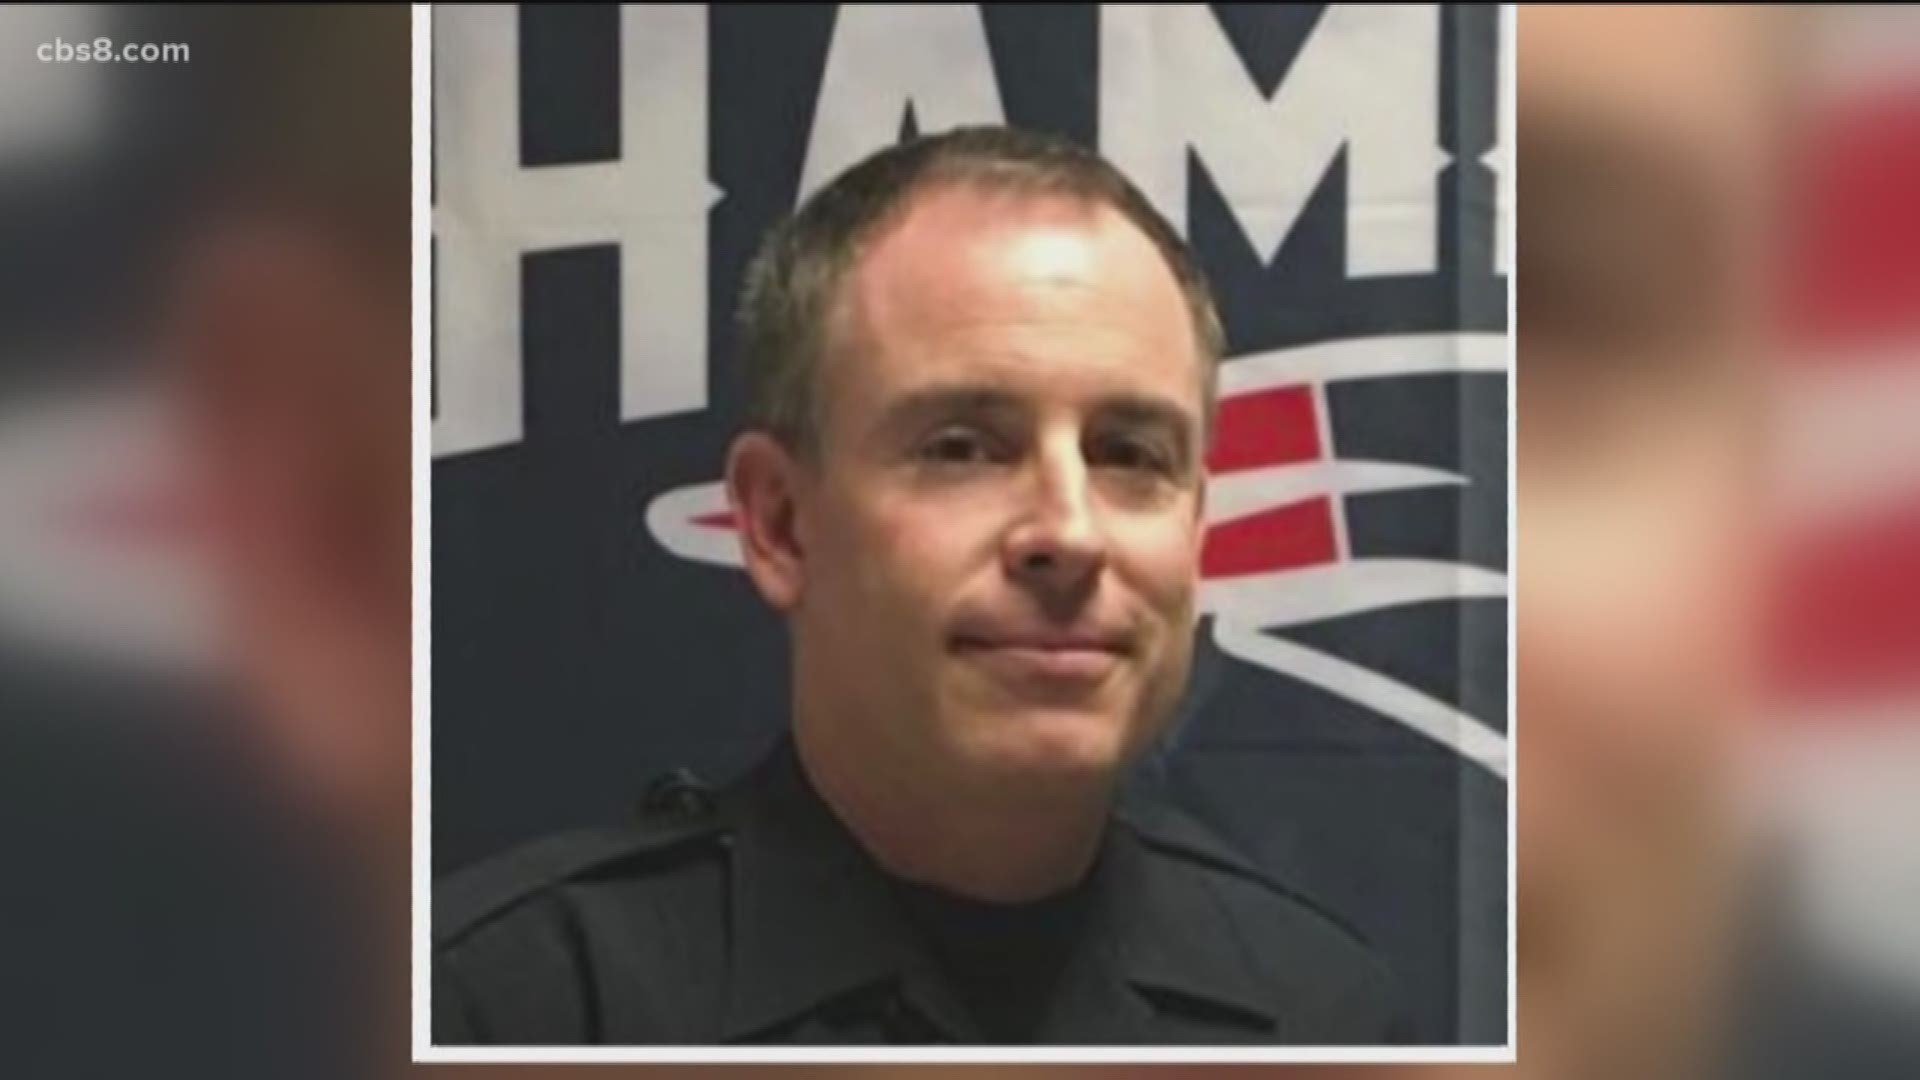 A San Diego police sergeant facing charges of soliciting minors for sex failed to show up for his arraignment Monday before being found dead at his home from an apparent self-inflicted gunshot wound.